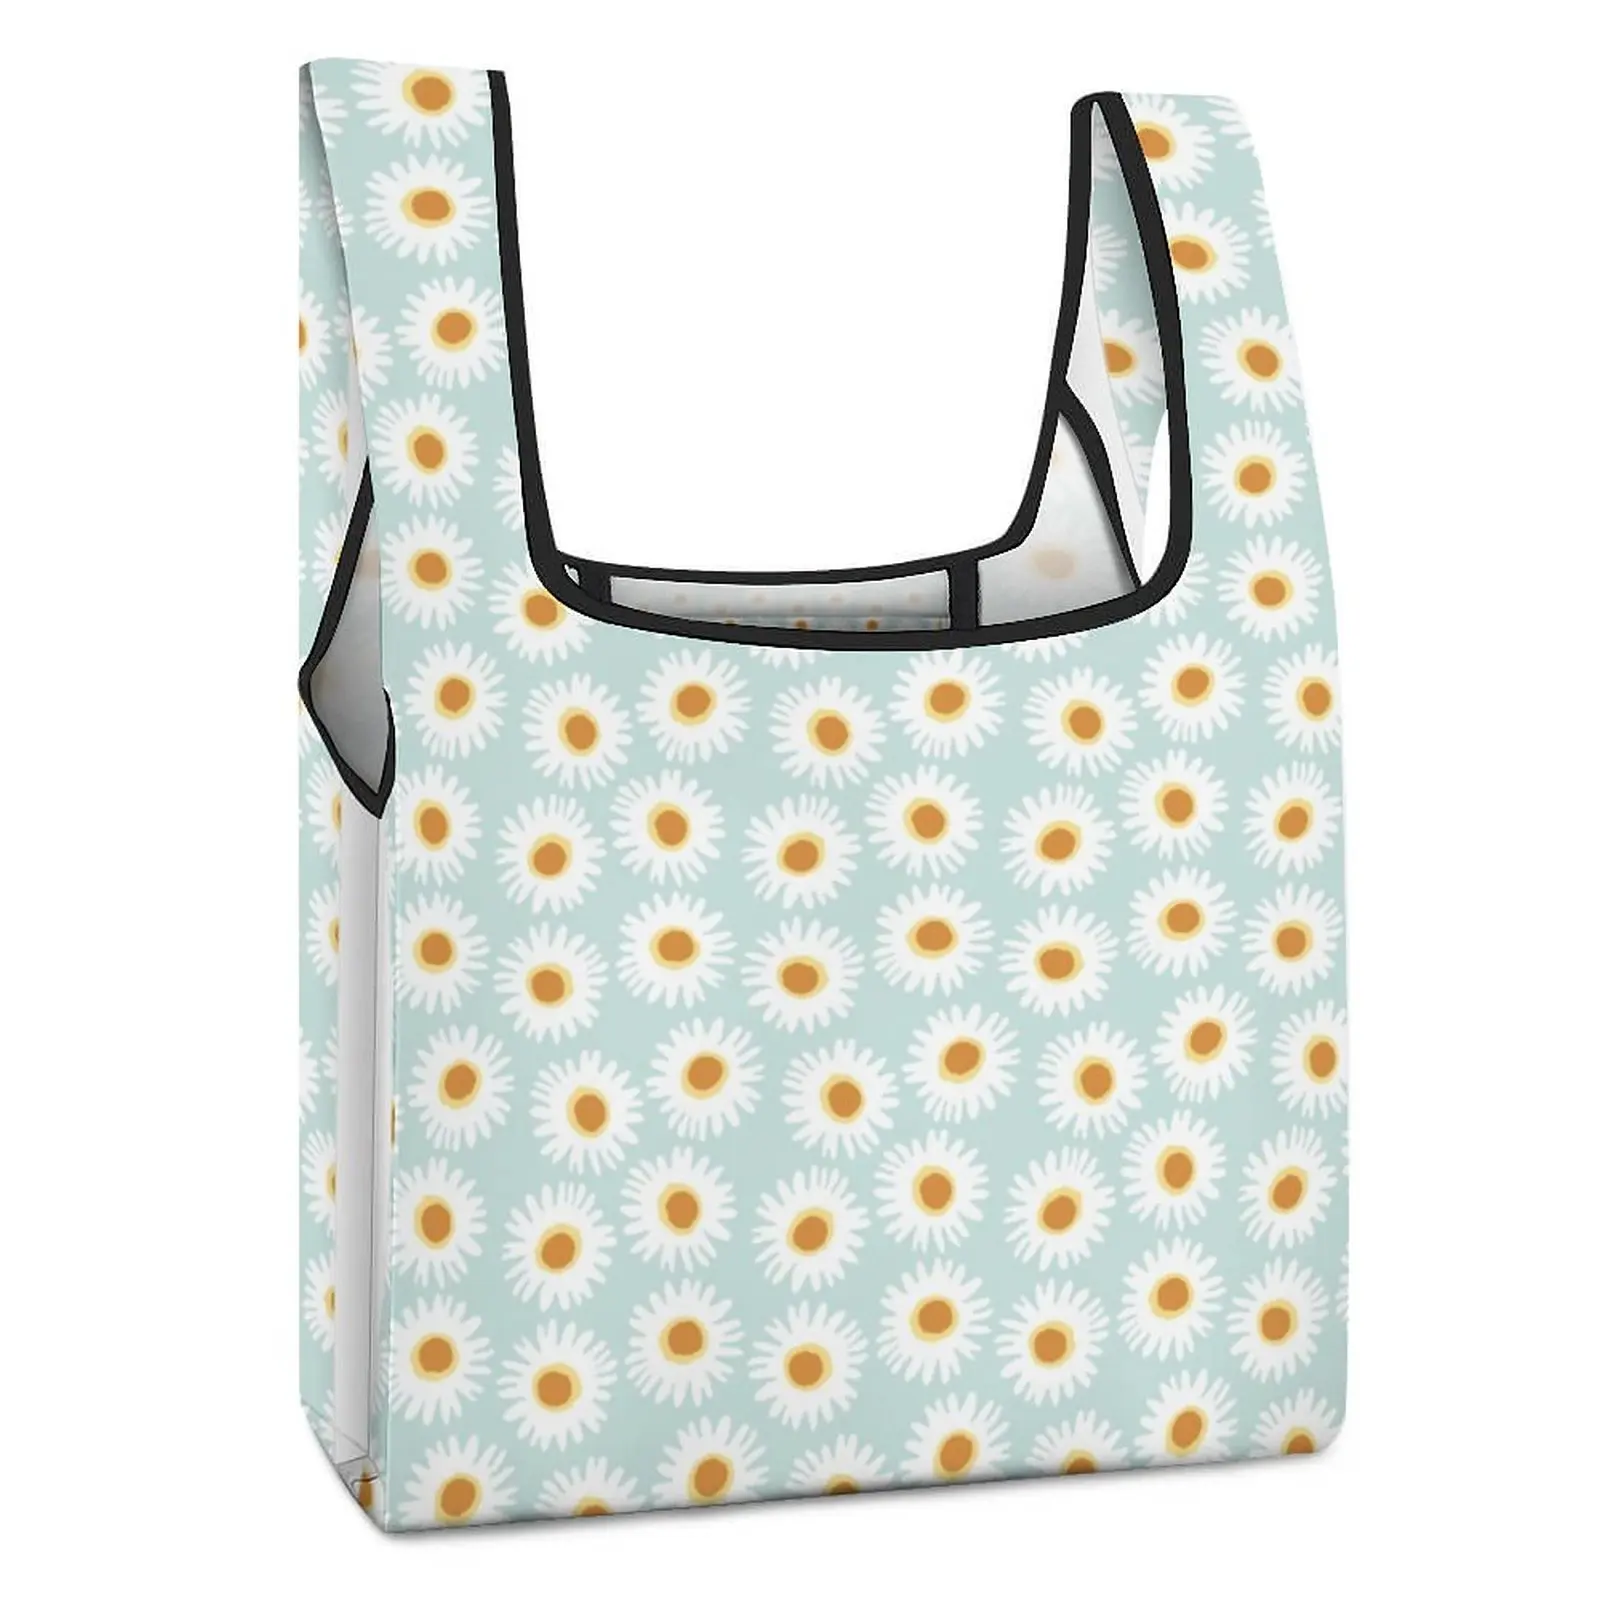 Customized Printed Supermarket Shopper Bags Waterproof Foldable Shopping Bags Blue Sunflower Bag Clothing Shoes Bags